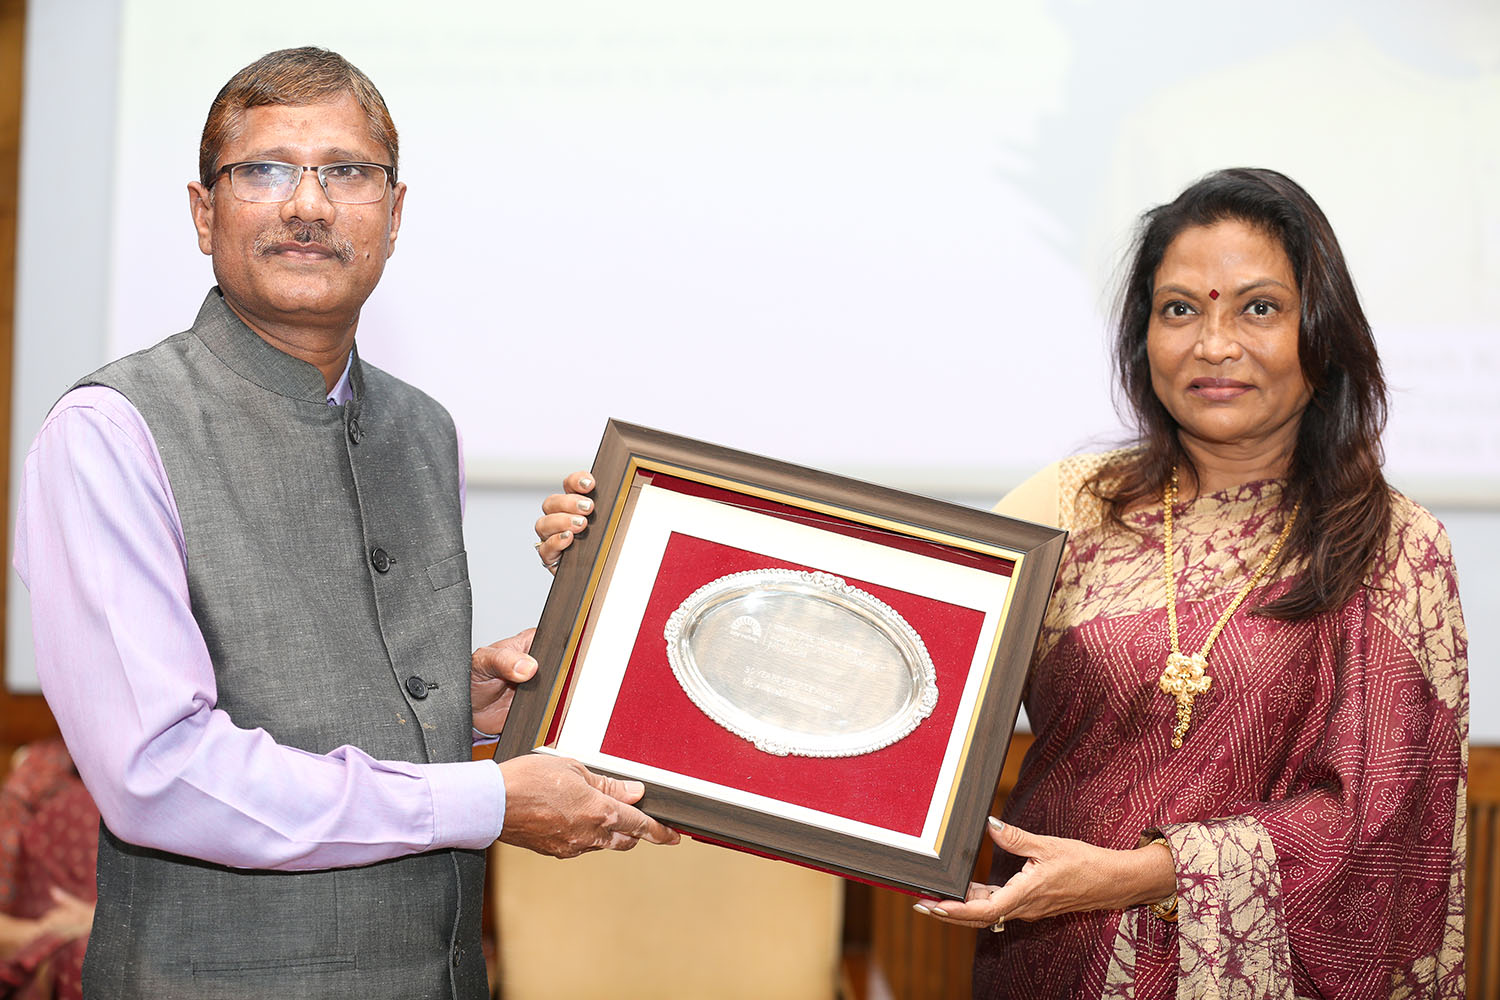 Mr Awadhesh Kumar Tripathi, Executive, Hindi Cell, receives the award for 30 years of service from Ms. Kalpana Saroj, Member of the Board of Governors, IIMB, during the institute’s 49th Foundation Day celebrations.